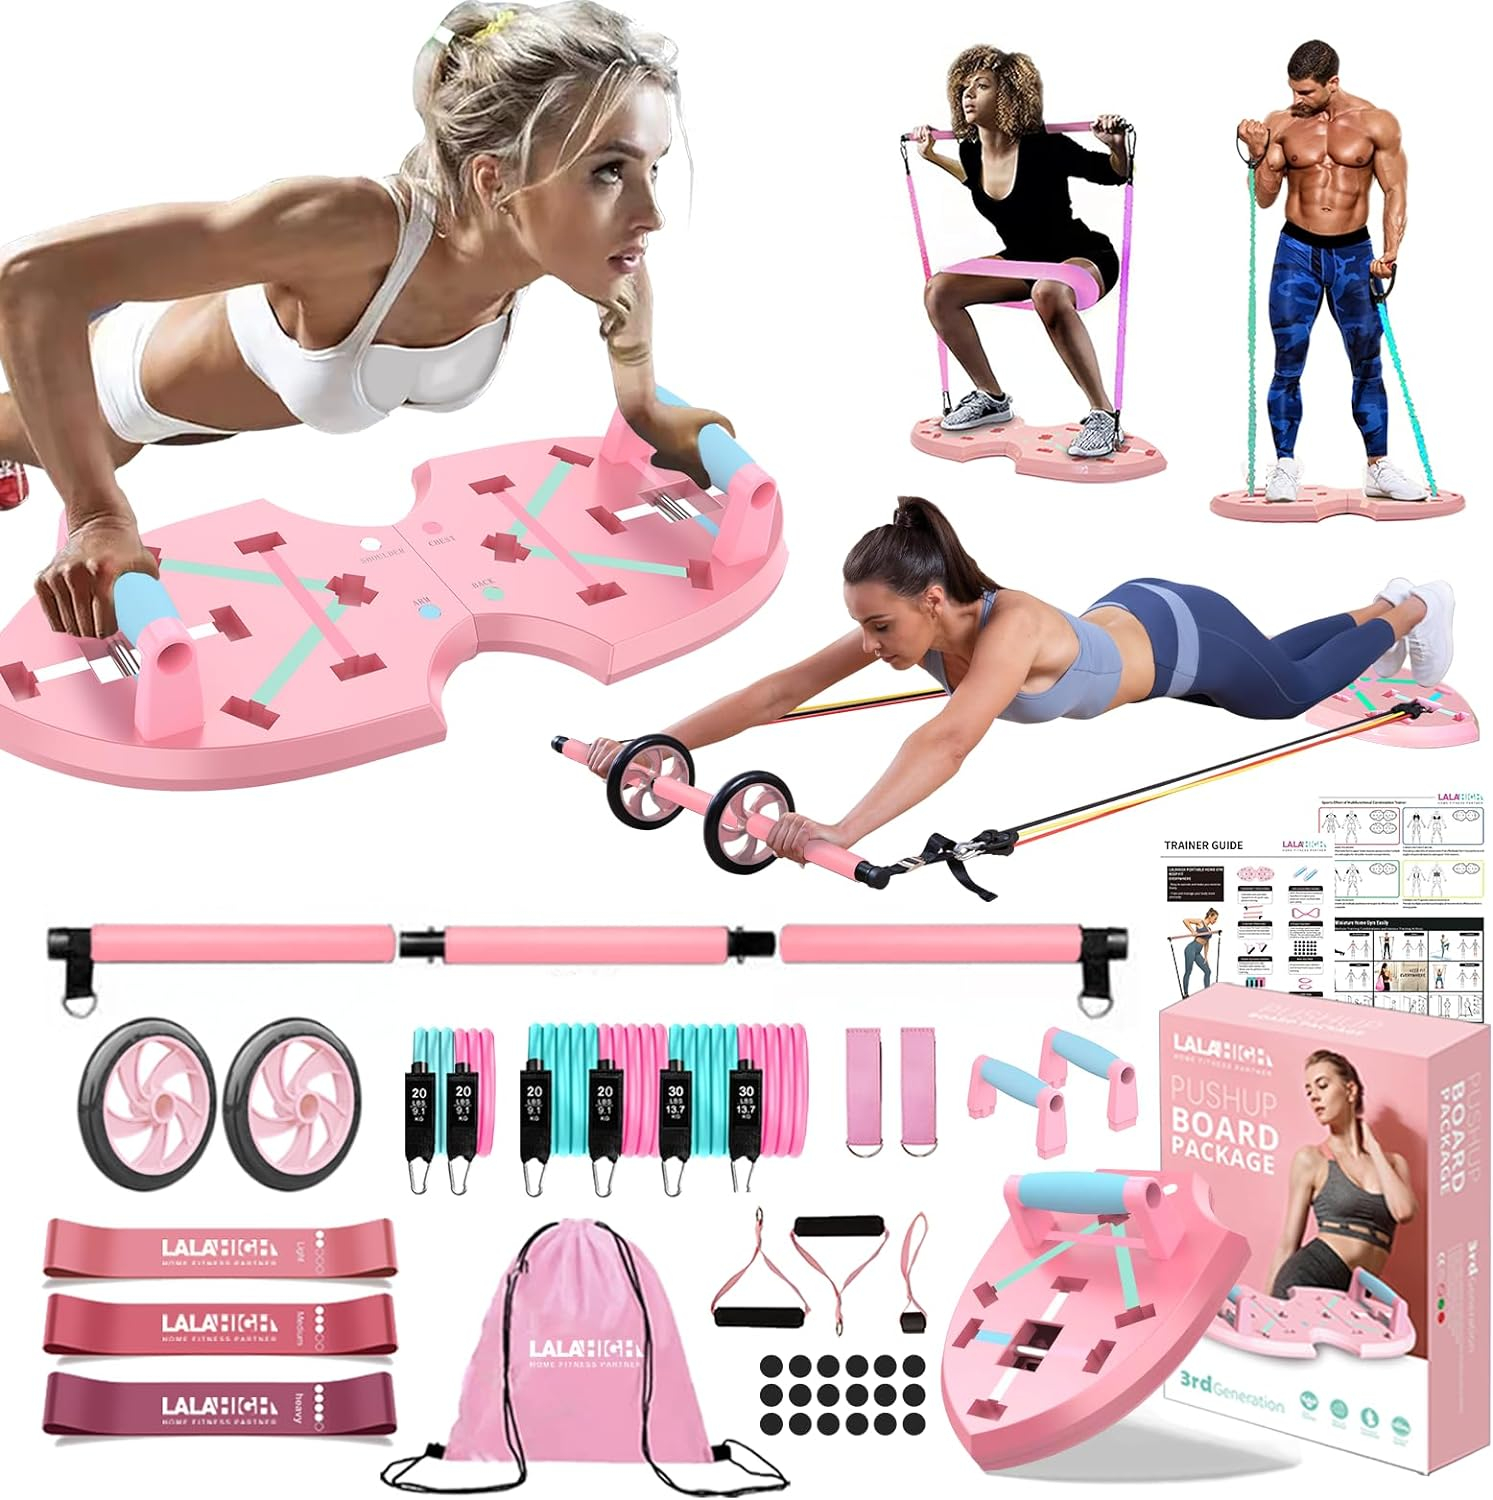 LALAHIGH Home Workout Equipment for Women, Multifunction Push Up Board, Portable Home Gym System with Resistance Bands,Ab Roller Wheel, and 20 Gym Accessories, Professional Strength Training Exercise Equipment For Body Shaping